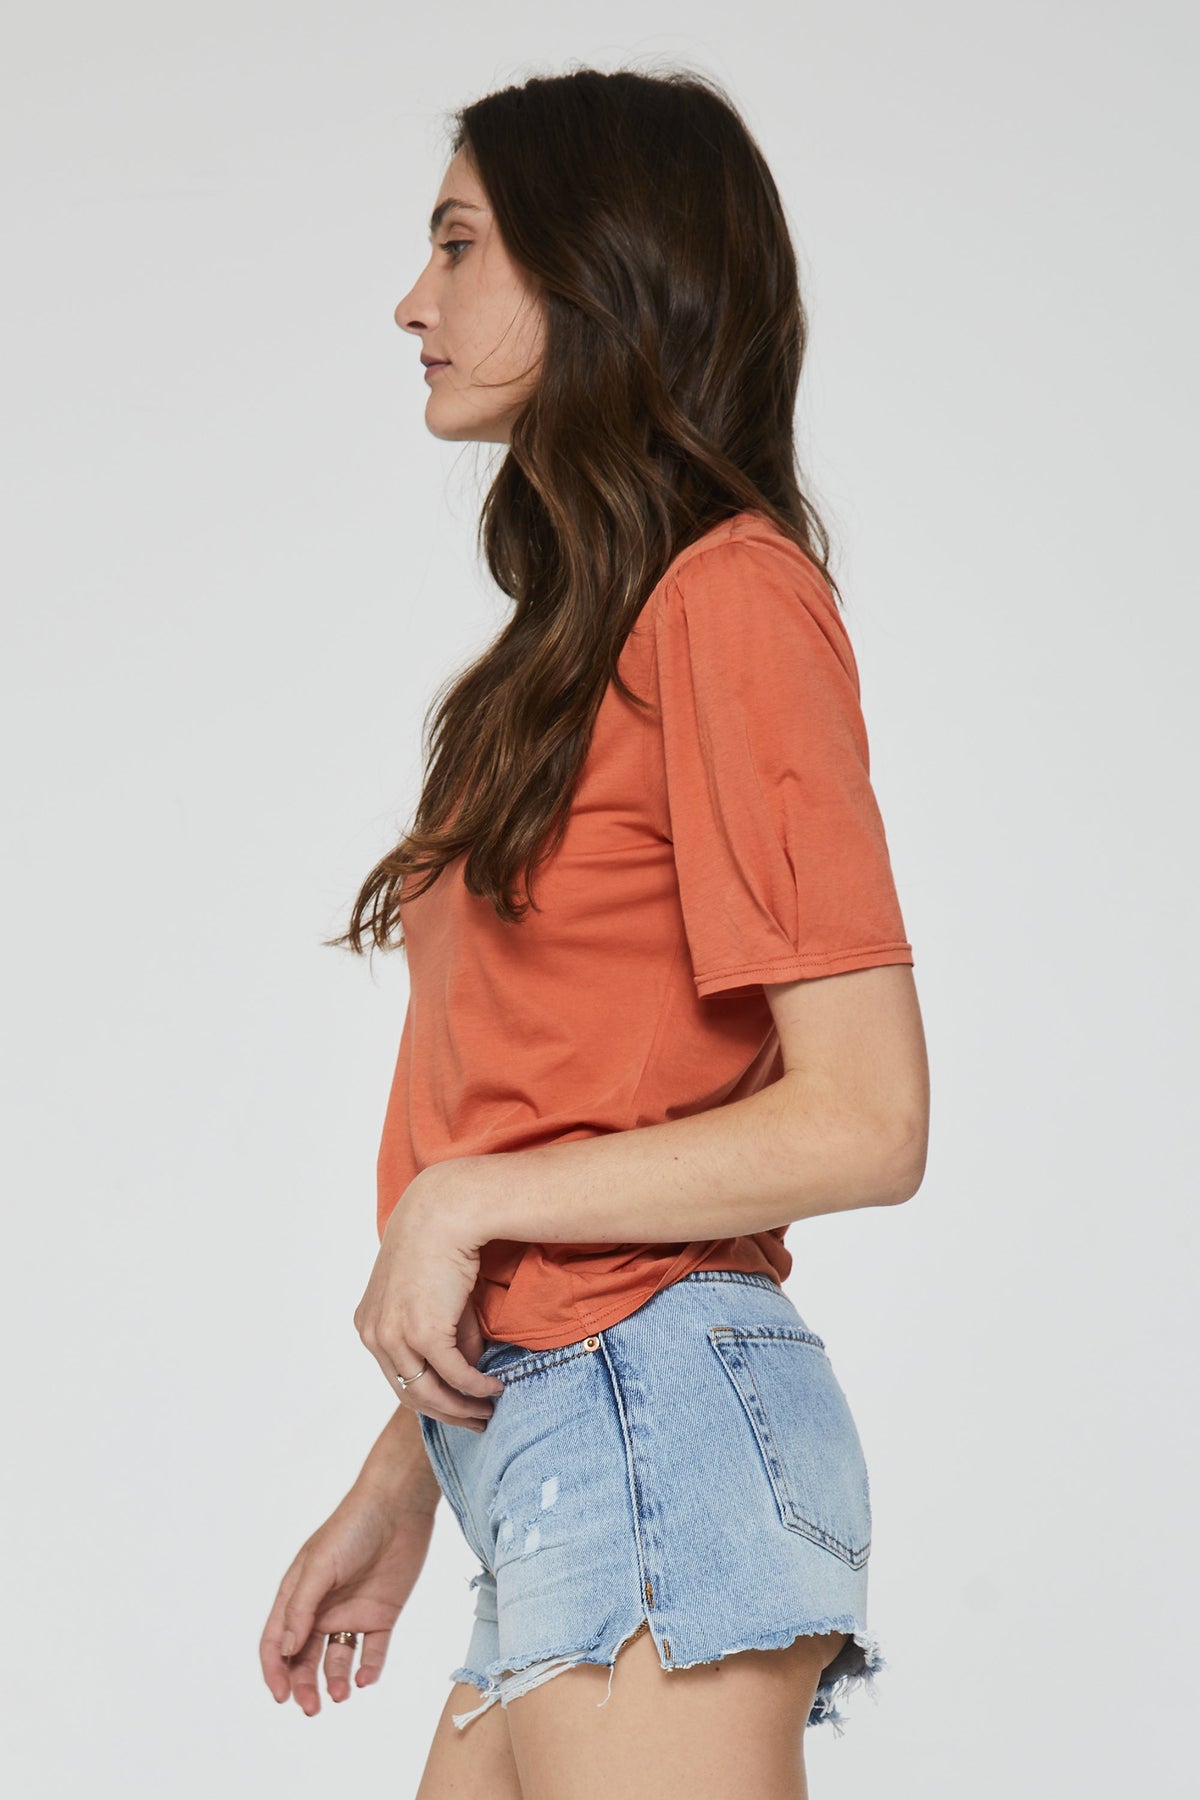 scarlette-puff-sleeve-top-marmalade-side-image-another-love-clothing